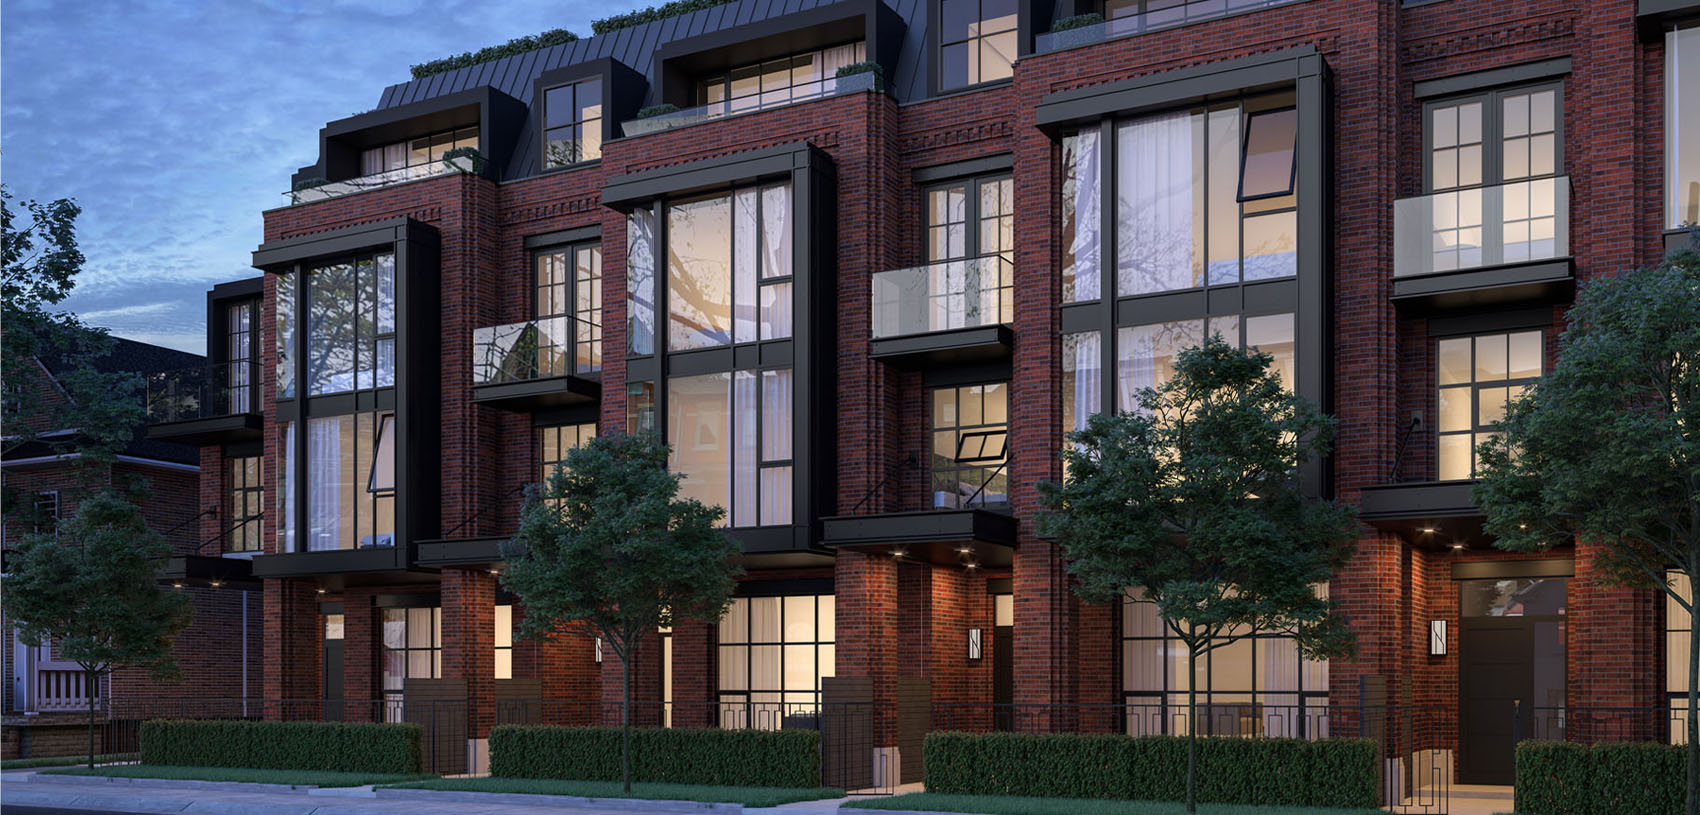 Exterior rendering of 36 Birch Condos and streetscape.